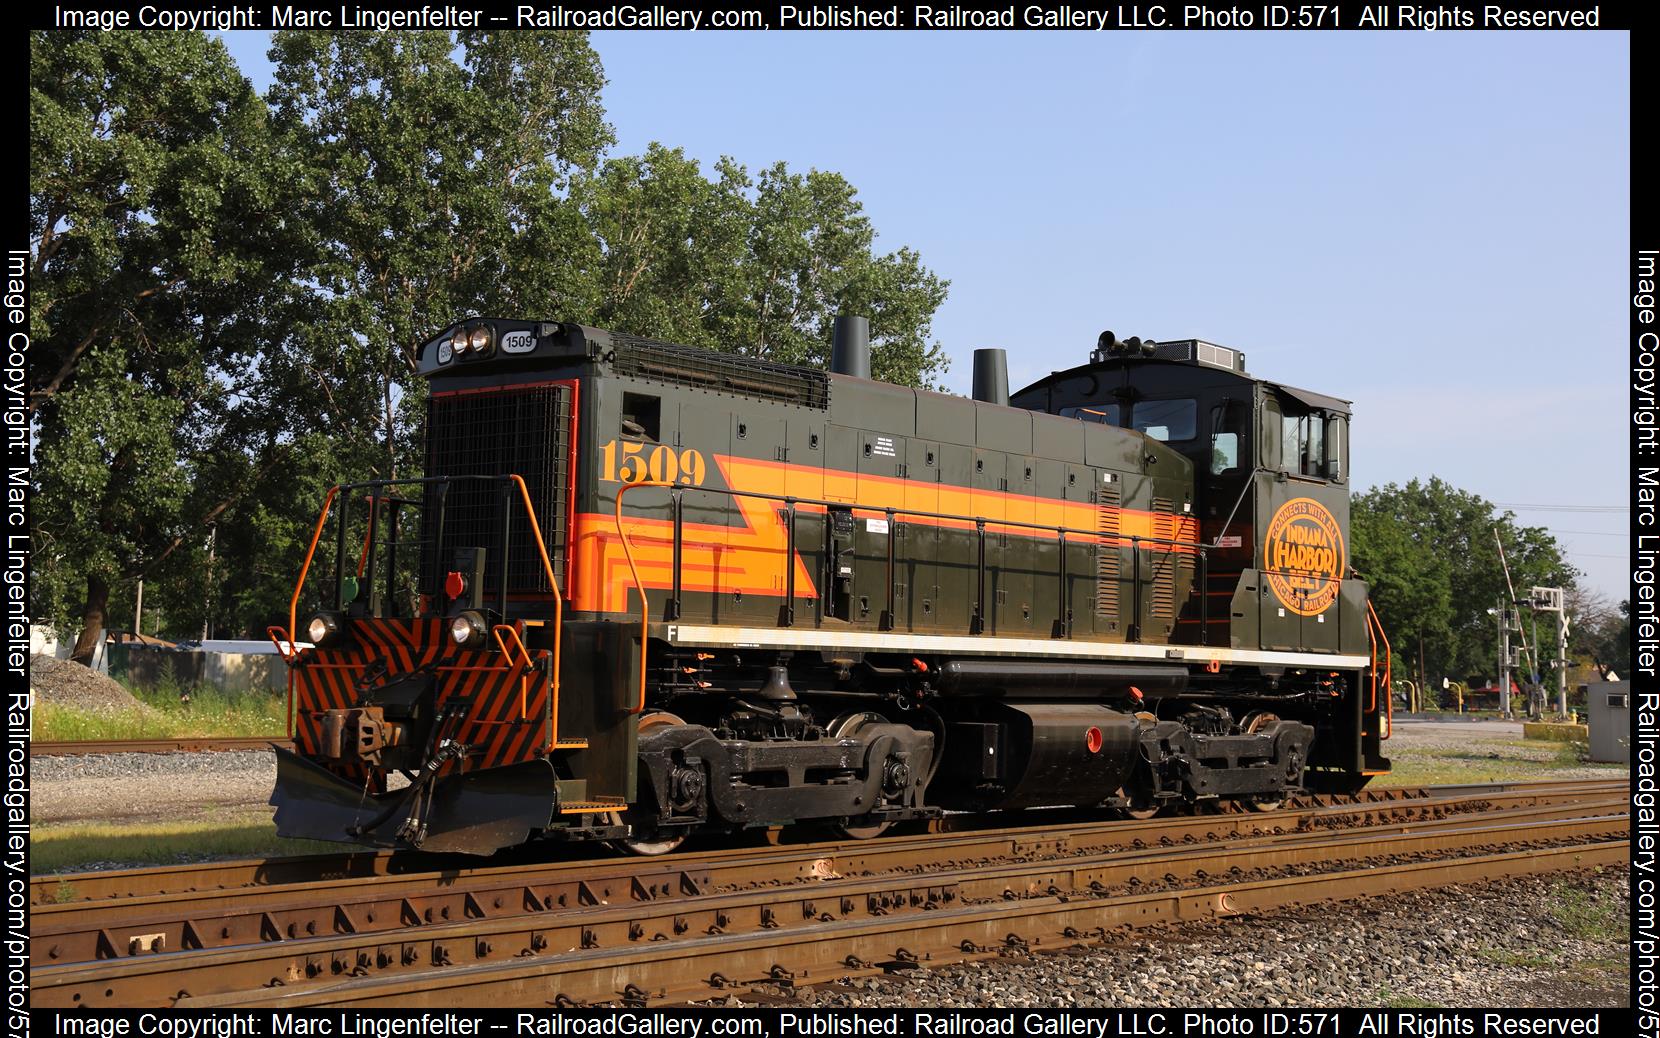 IHB 1509 is a class EMD SW1500 and  is pictured in New Chicago, Indiana, USA.  This was taken along the IHB Mainline on the Indiana Harbor Belt Railroad. Photo Copyright: Marc Lingenfelter uploaded to Railroad Gallery on 01/14/2023. This photograph of IHB 1509 was taken on Wednesday, August 11, 2021. All Rights Reserved. 